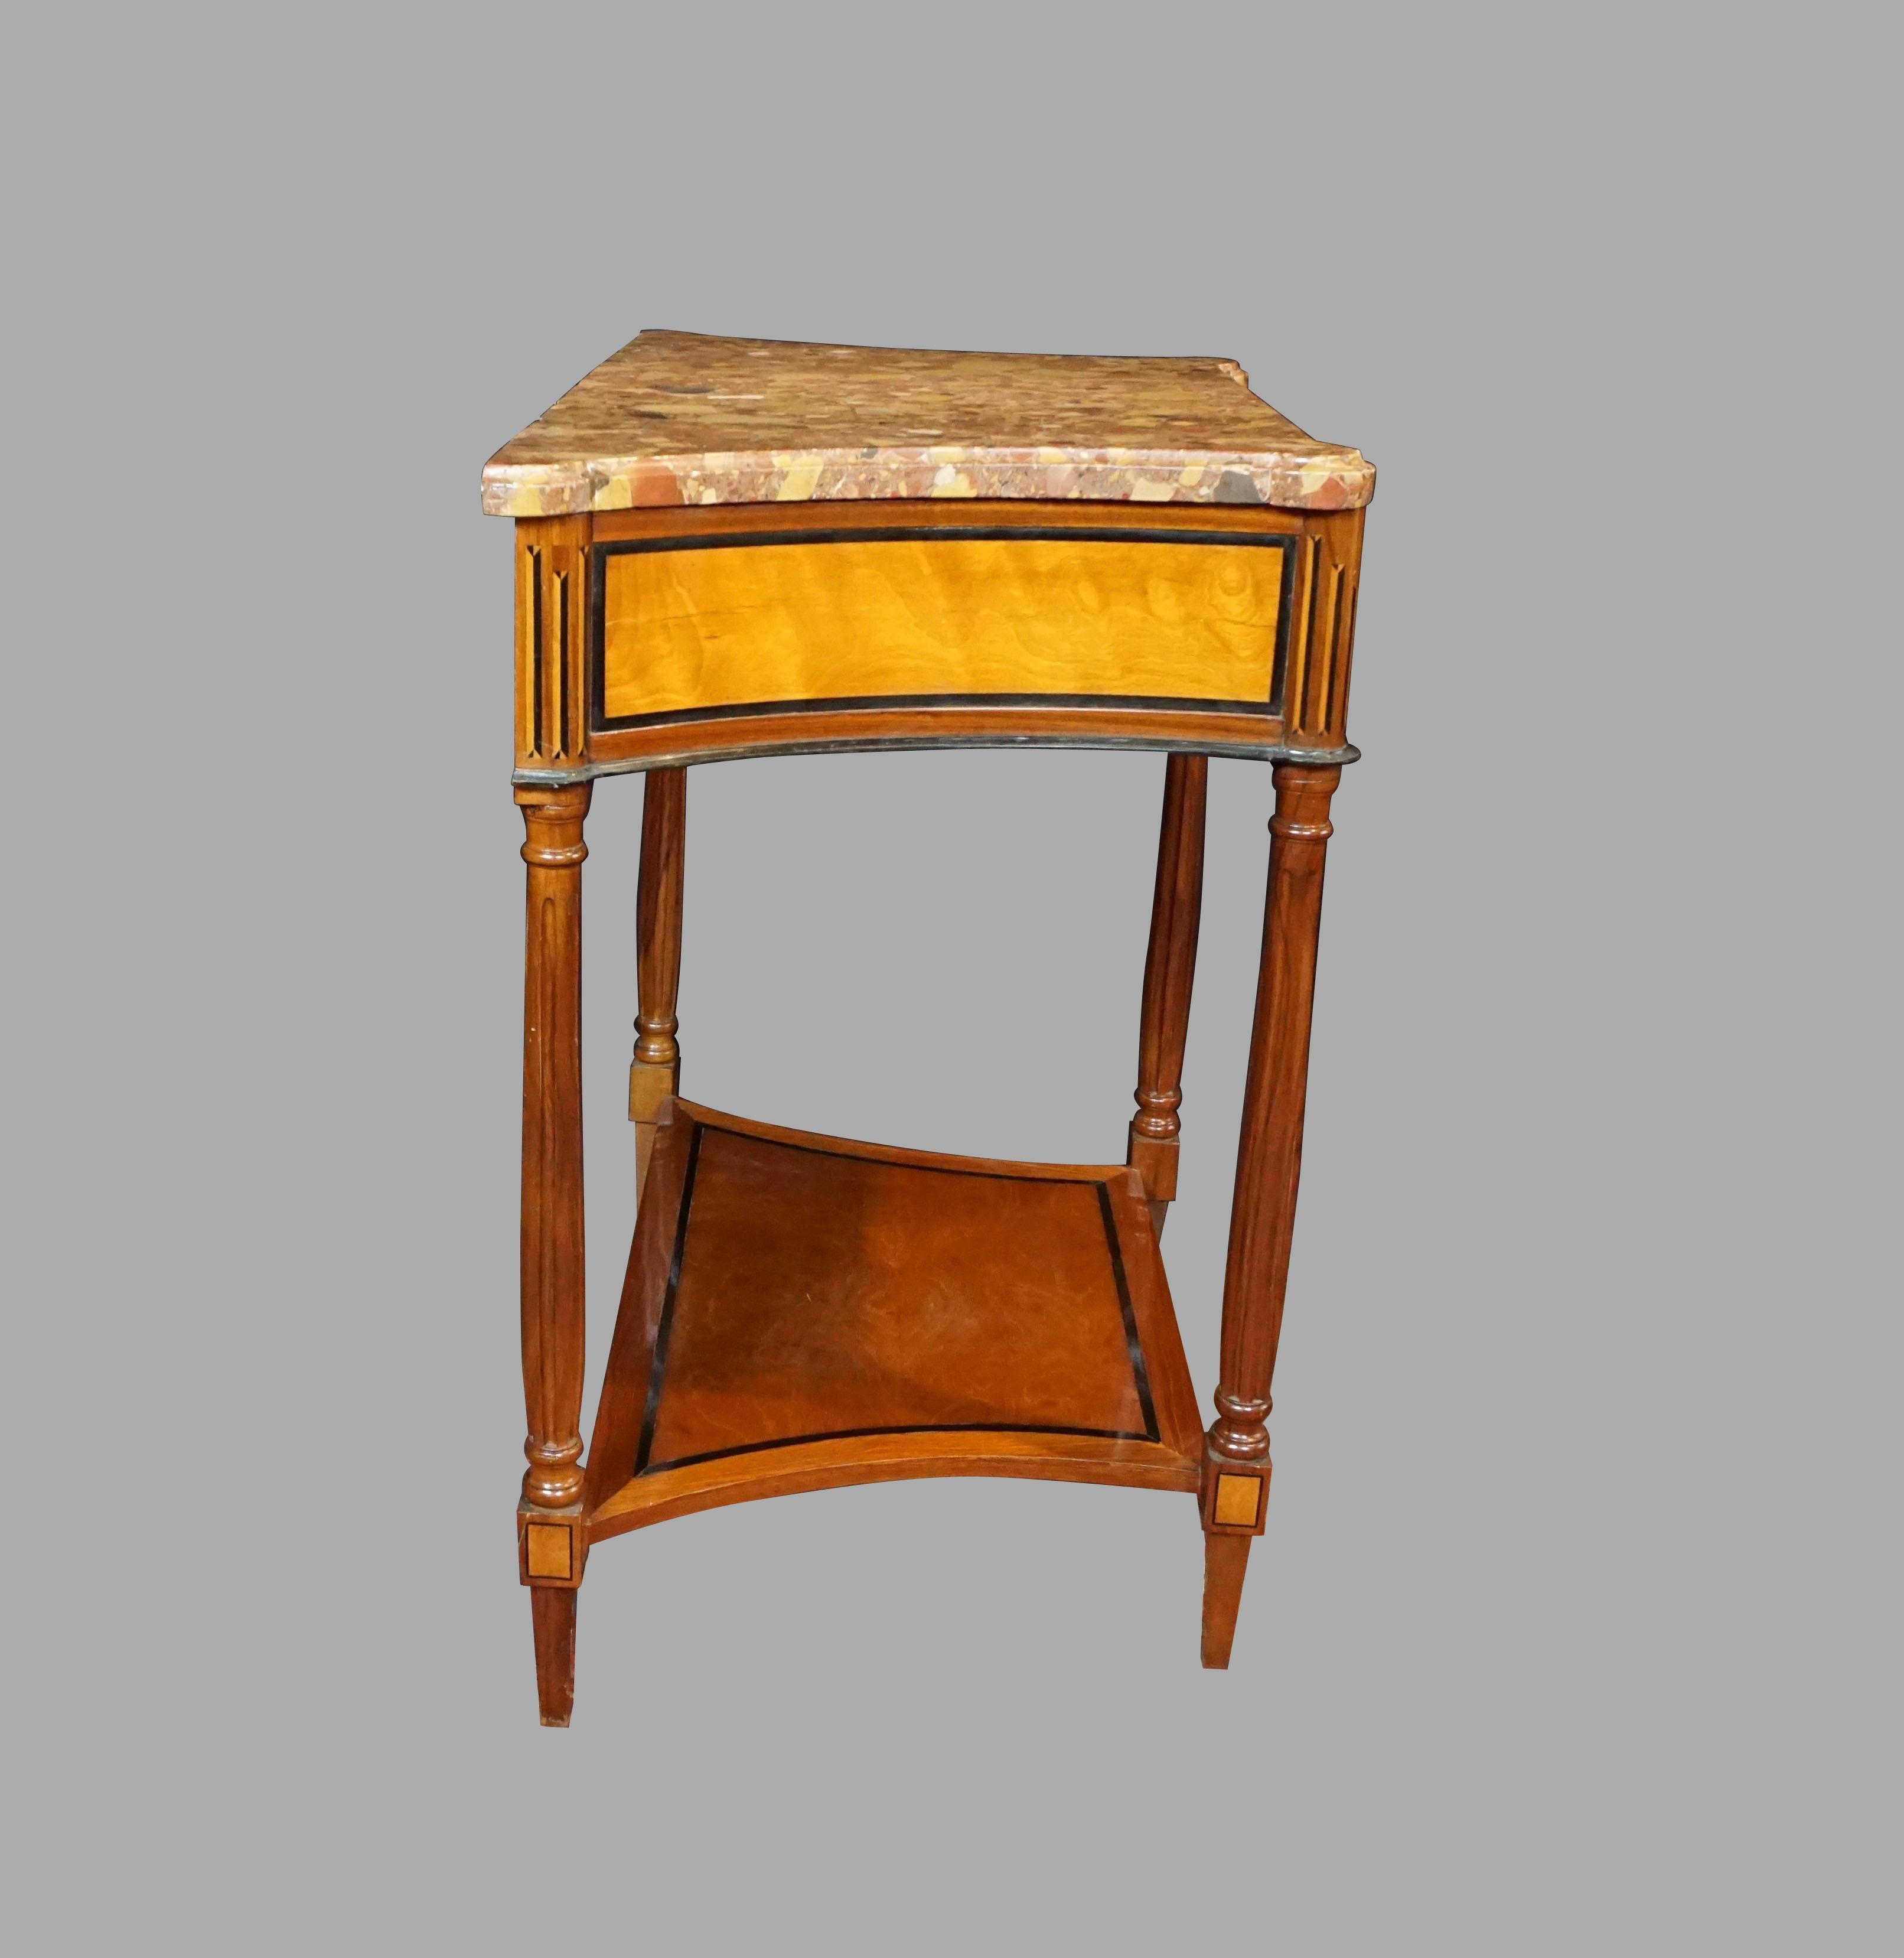 Late 18th Century Northern European Inlaid Satinwood Neoclassical Marble-Top Console Table